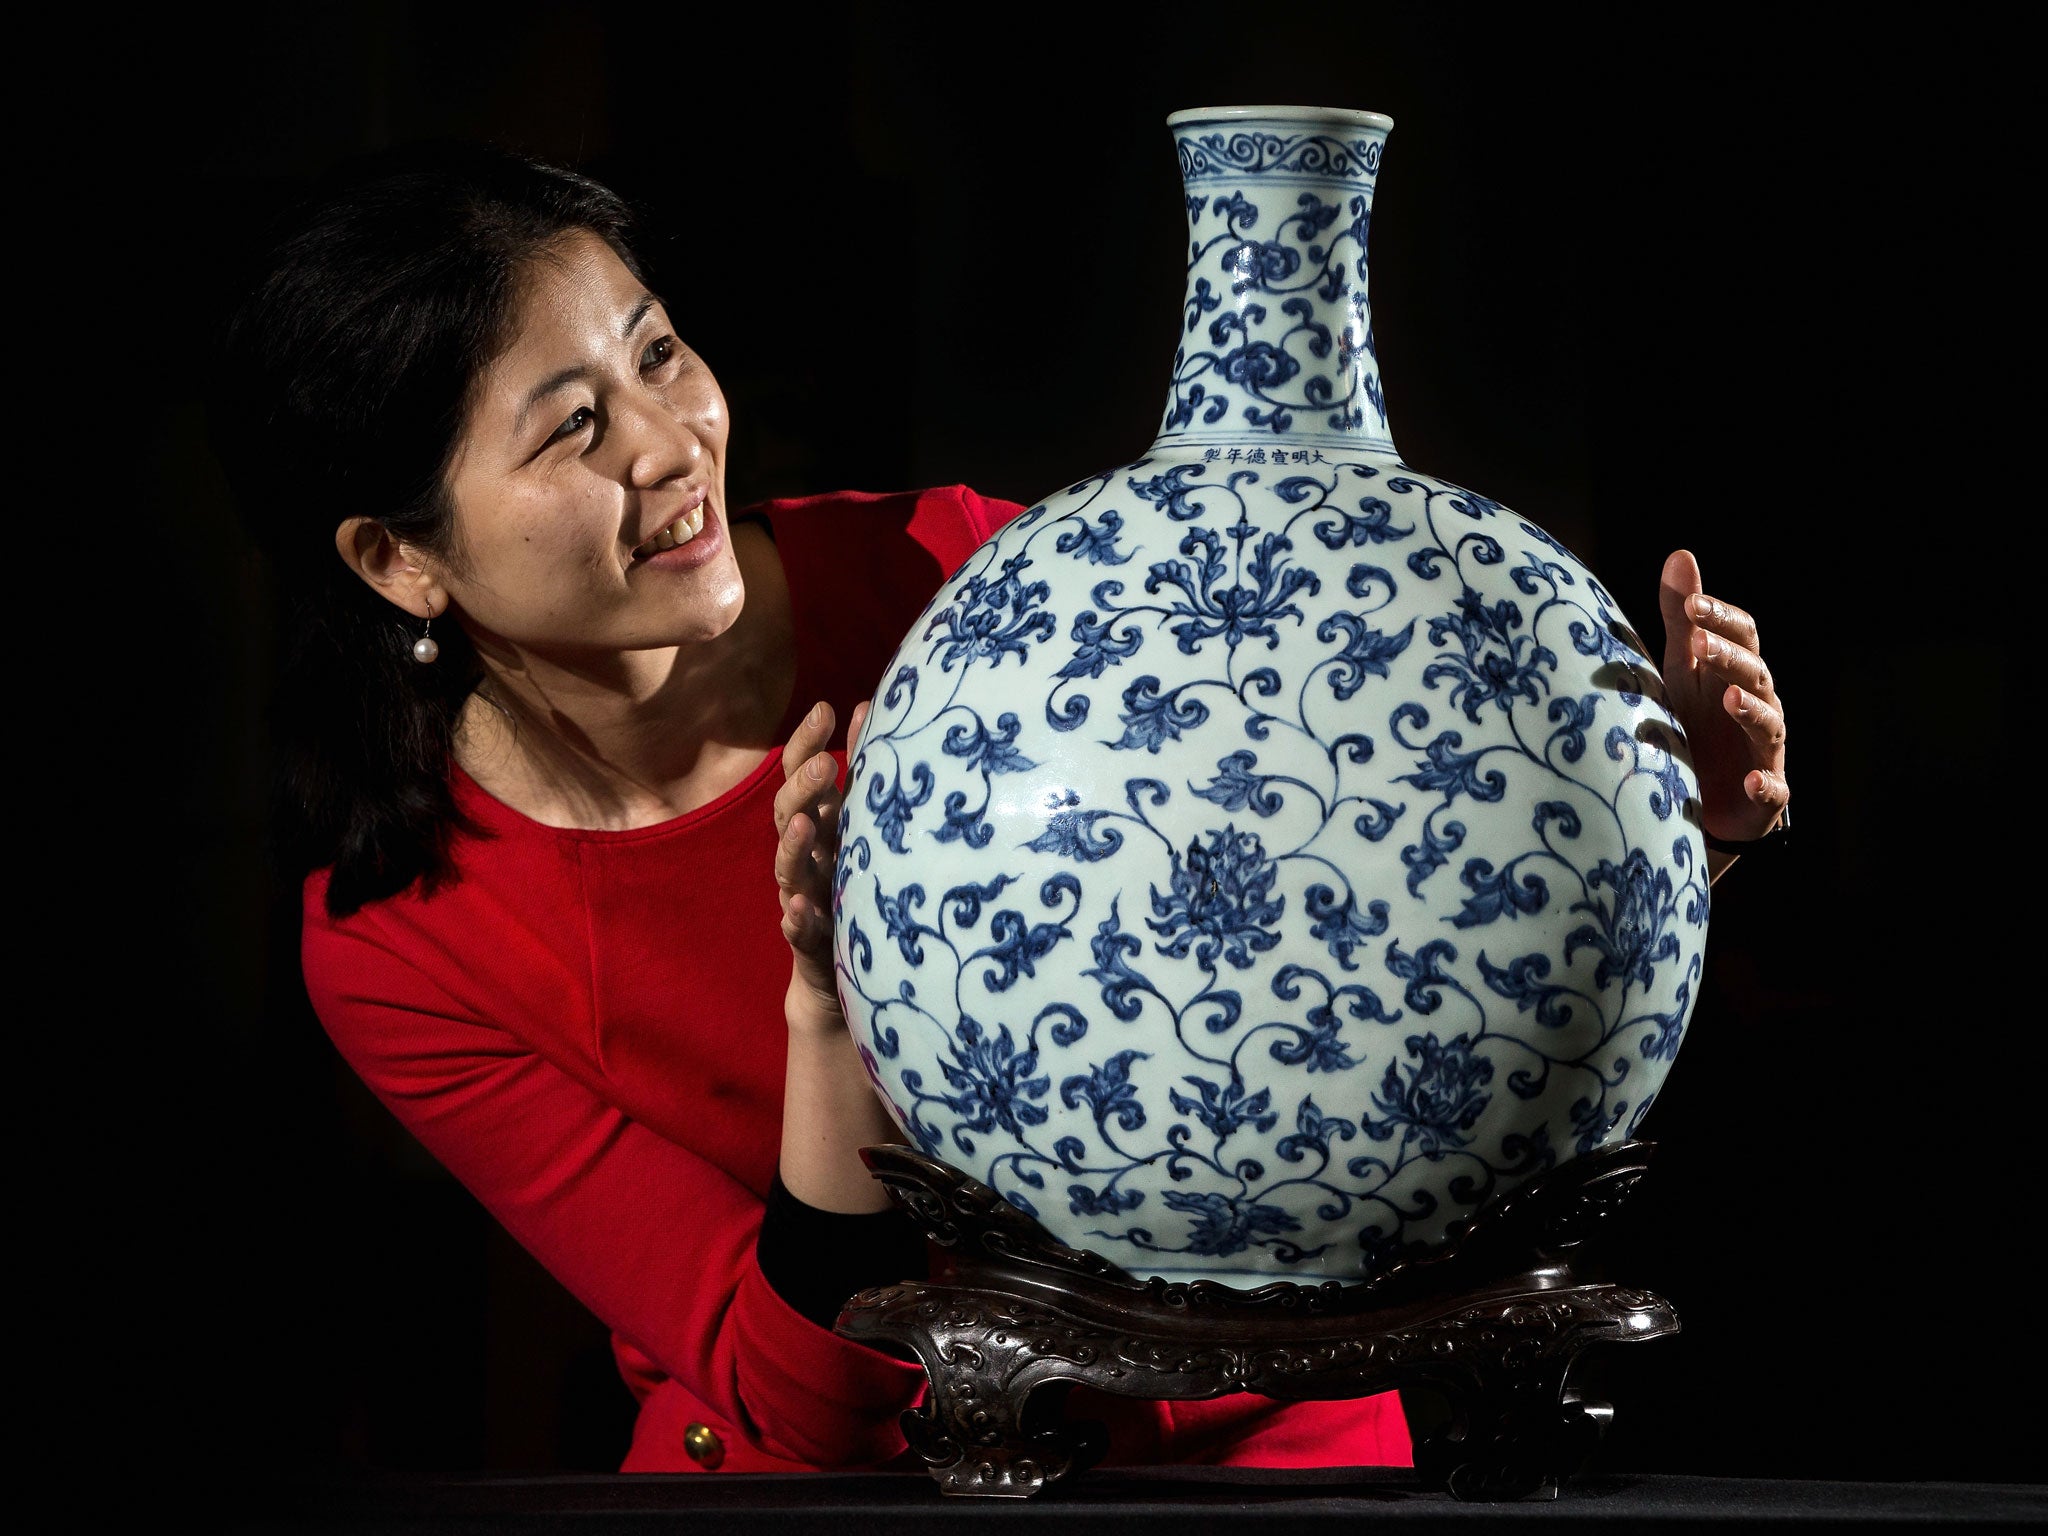 A British Museum employee poses behind a 15th century Imperial Ming Vase.